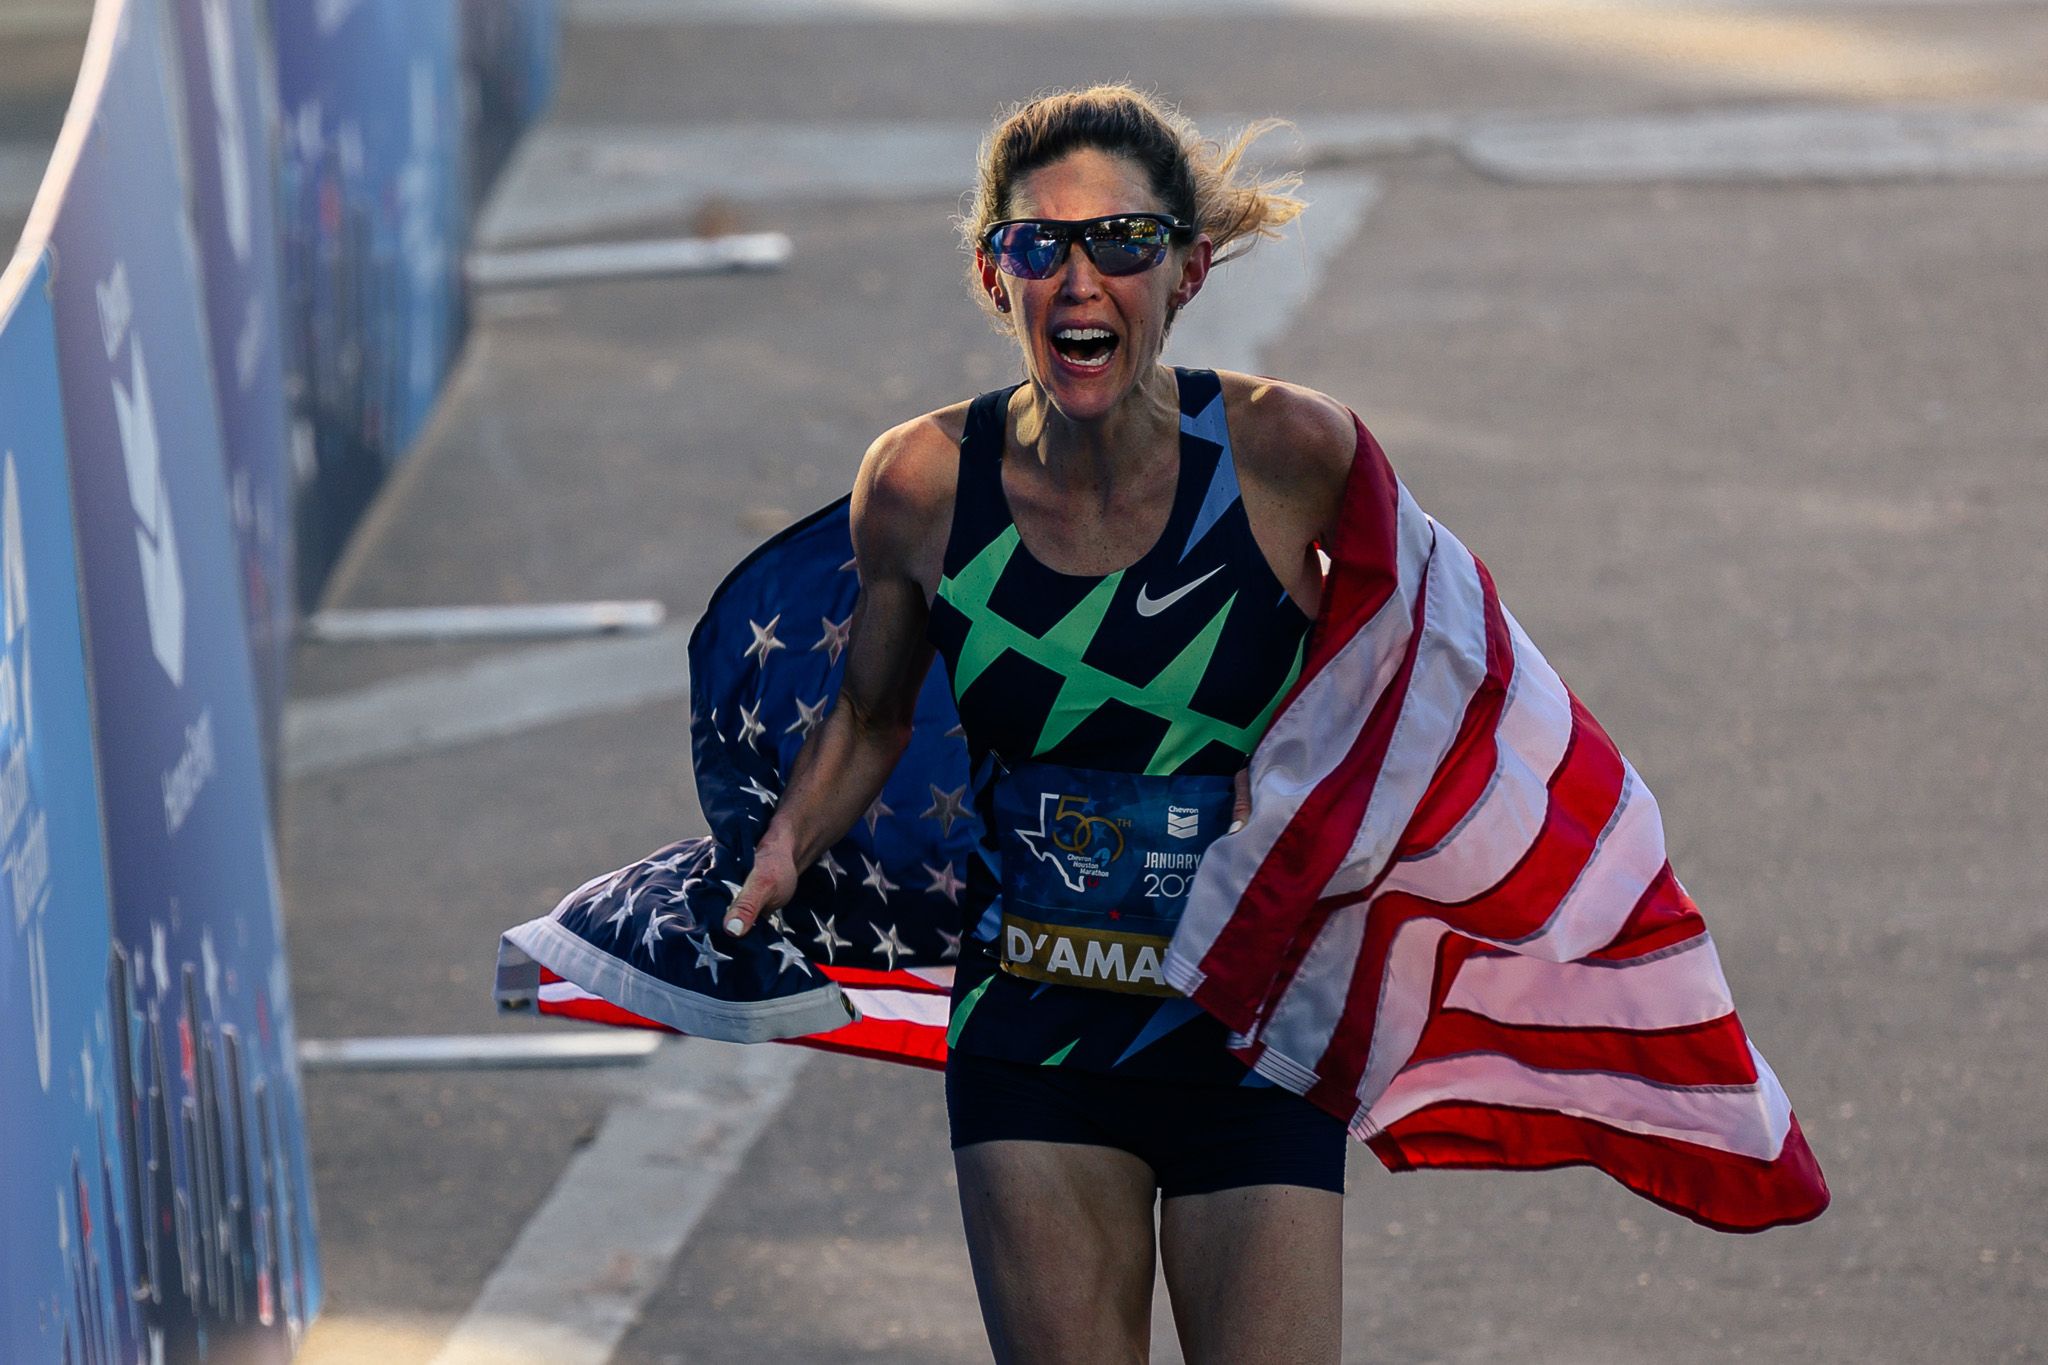 Keira D'Amato on Going from 'Hobby Jogger' to the American Marathon Record